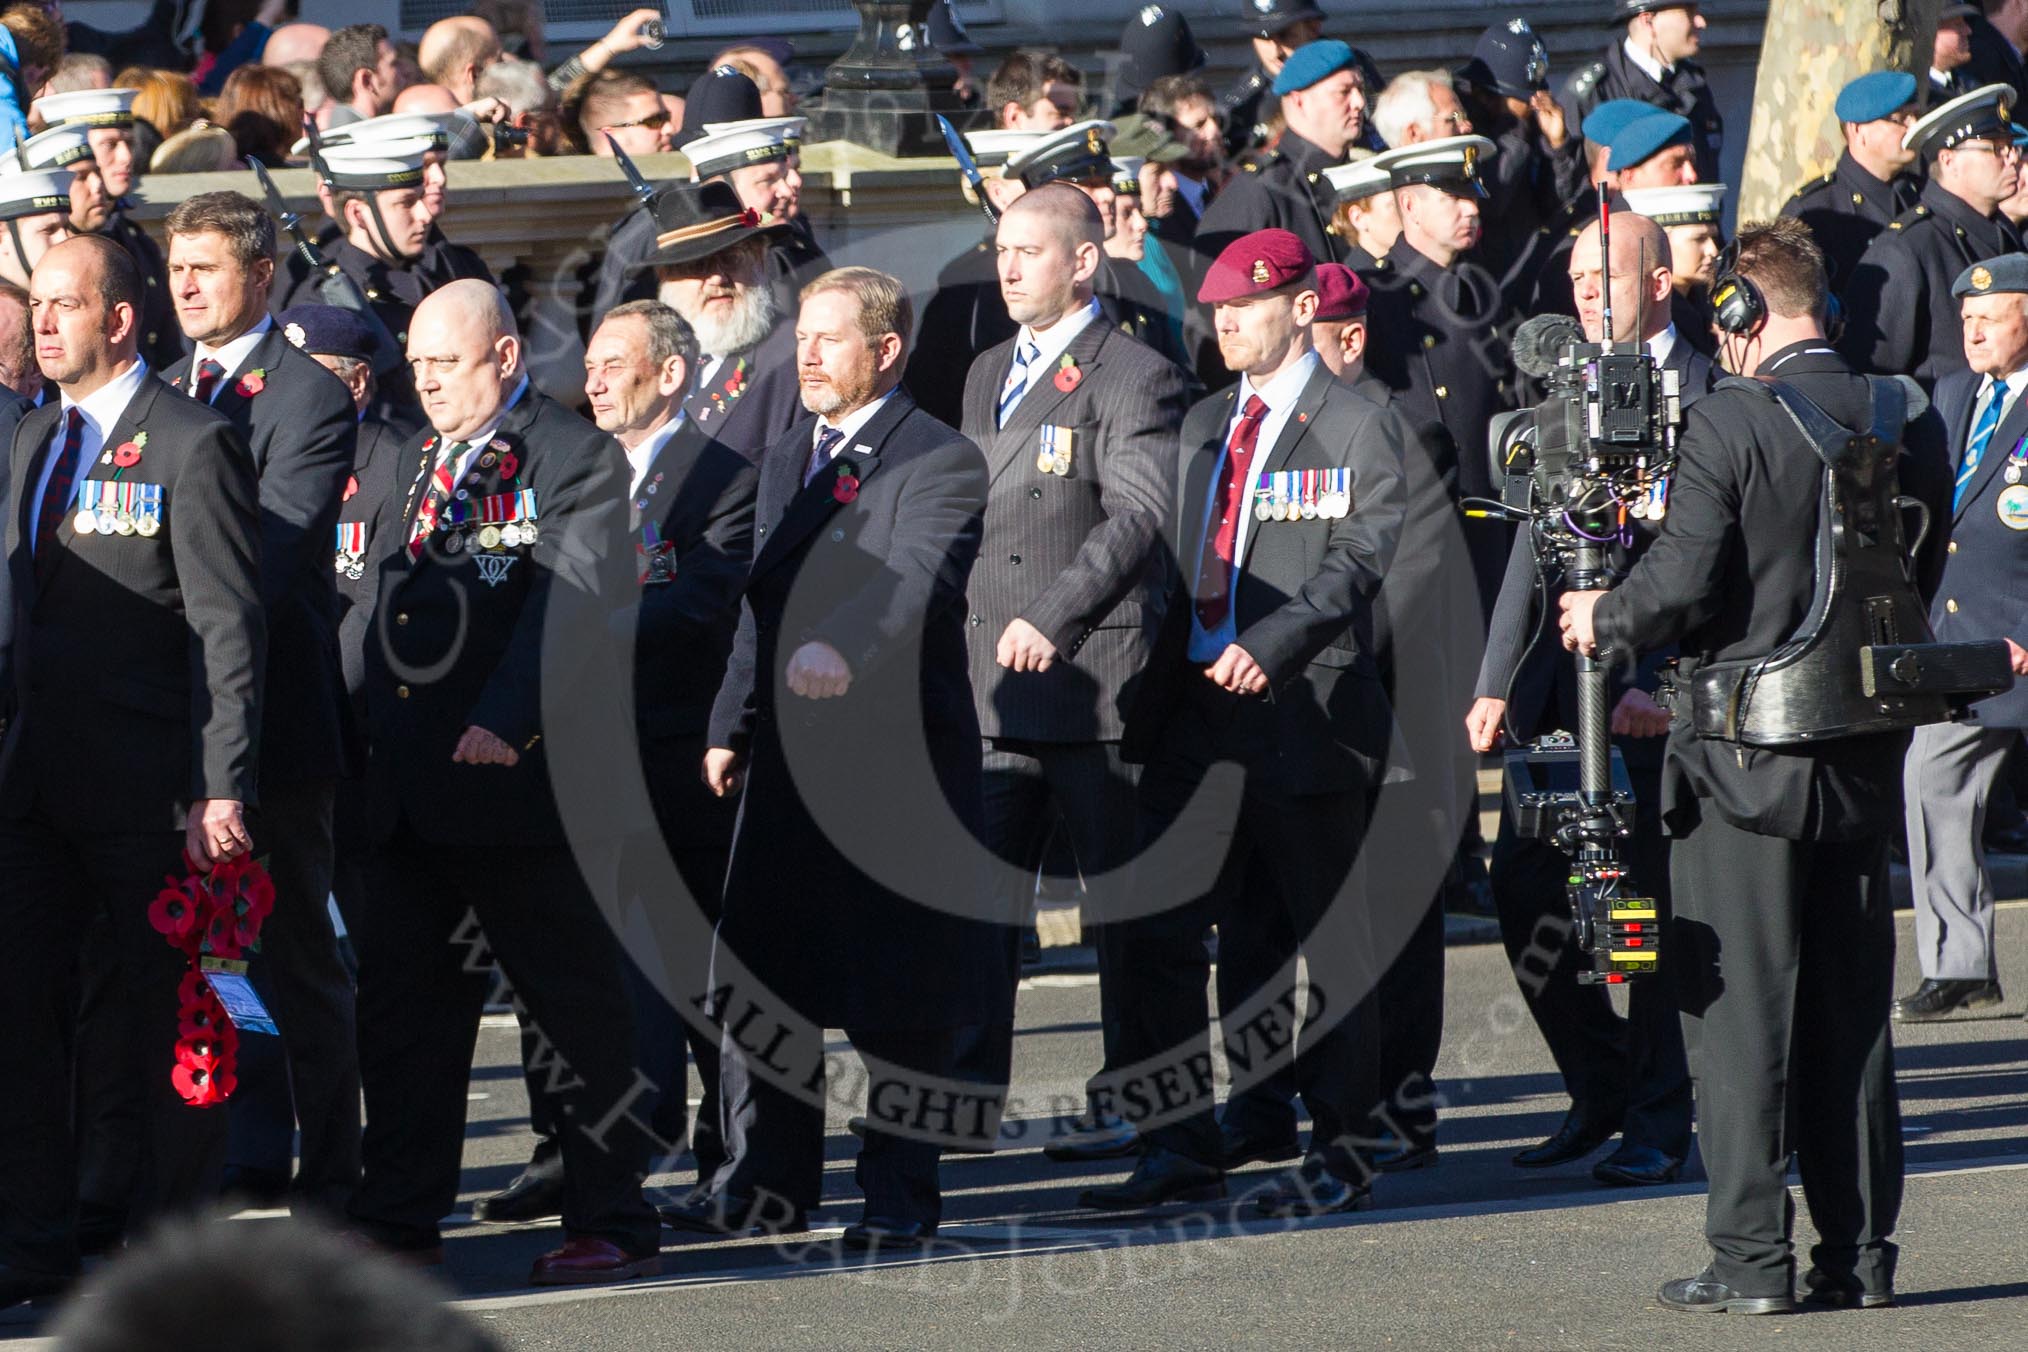 Remembrance Sunday 2012 Cenotaph March Past: Group E45 - Combat Stress..
Whitehall, Cenotaph,
London SW1,

United Kingdom,
on 11 November 2012 at 11:44, image #368